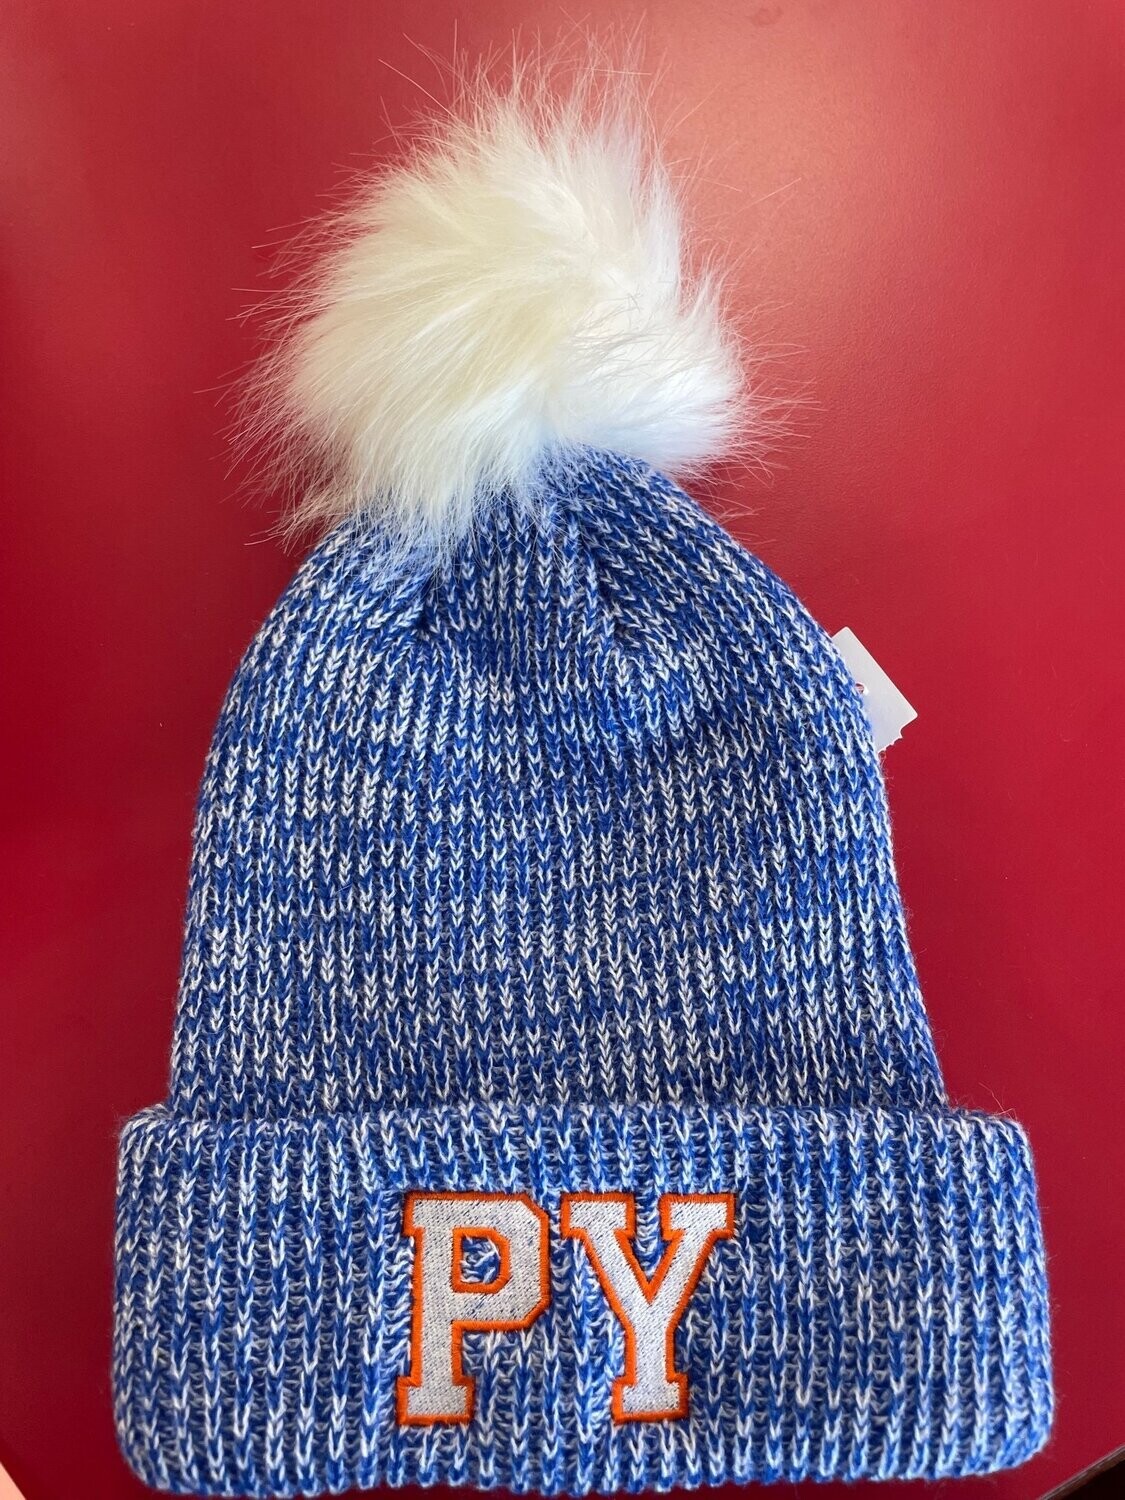 Penn Yan Quilted Pom Pom Winter Hat - Multiple Colors